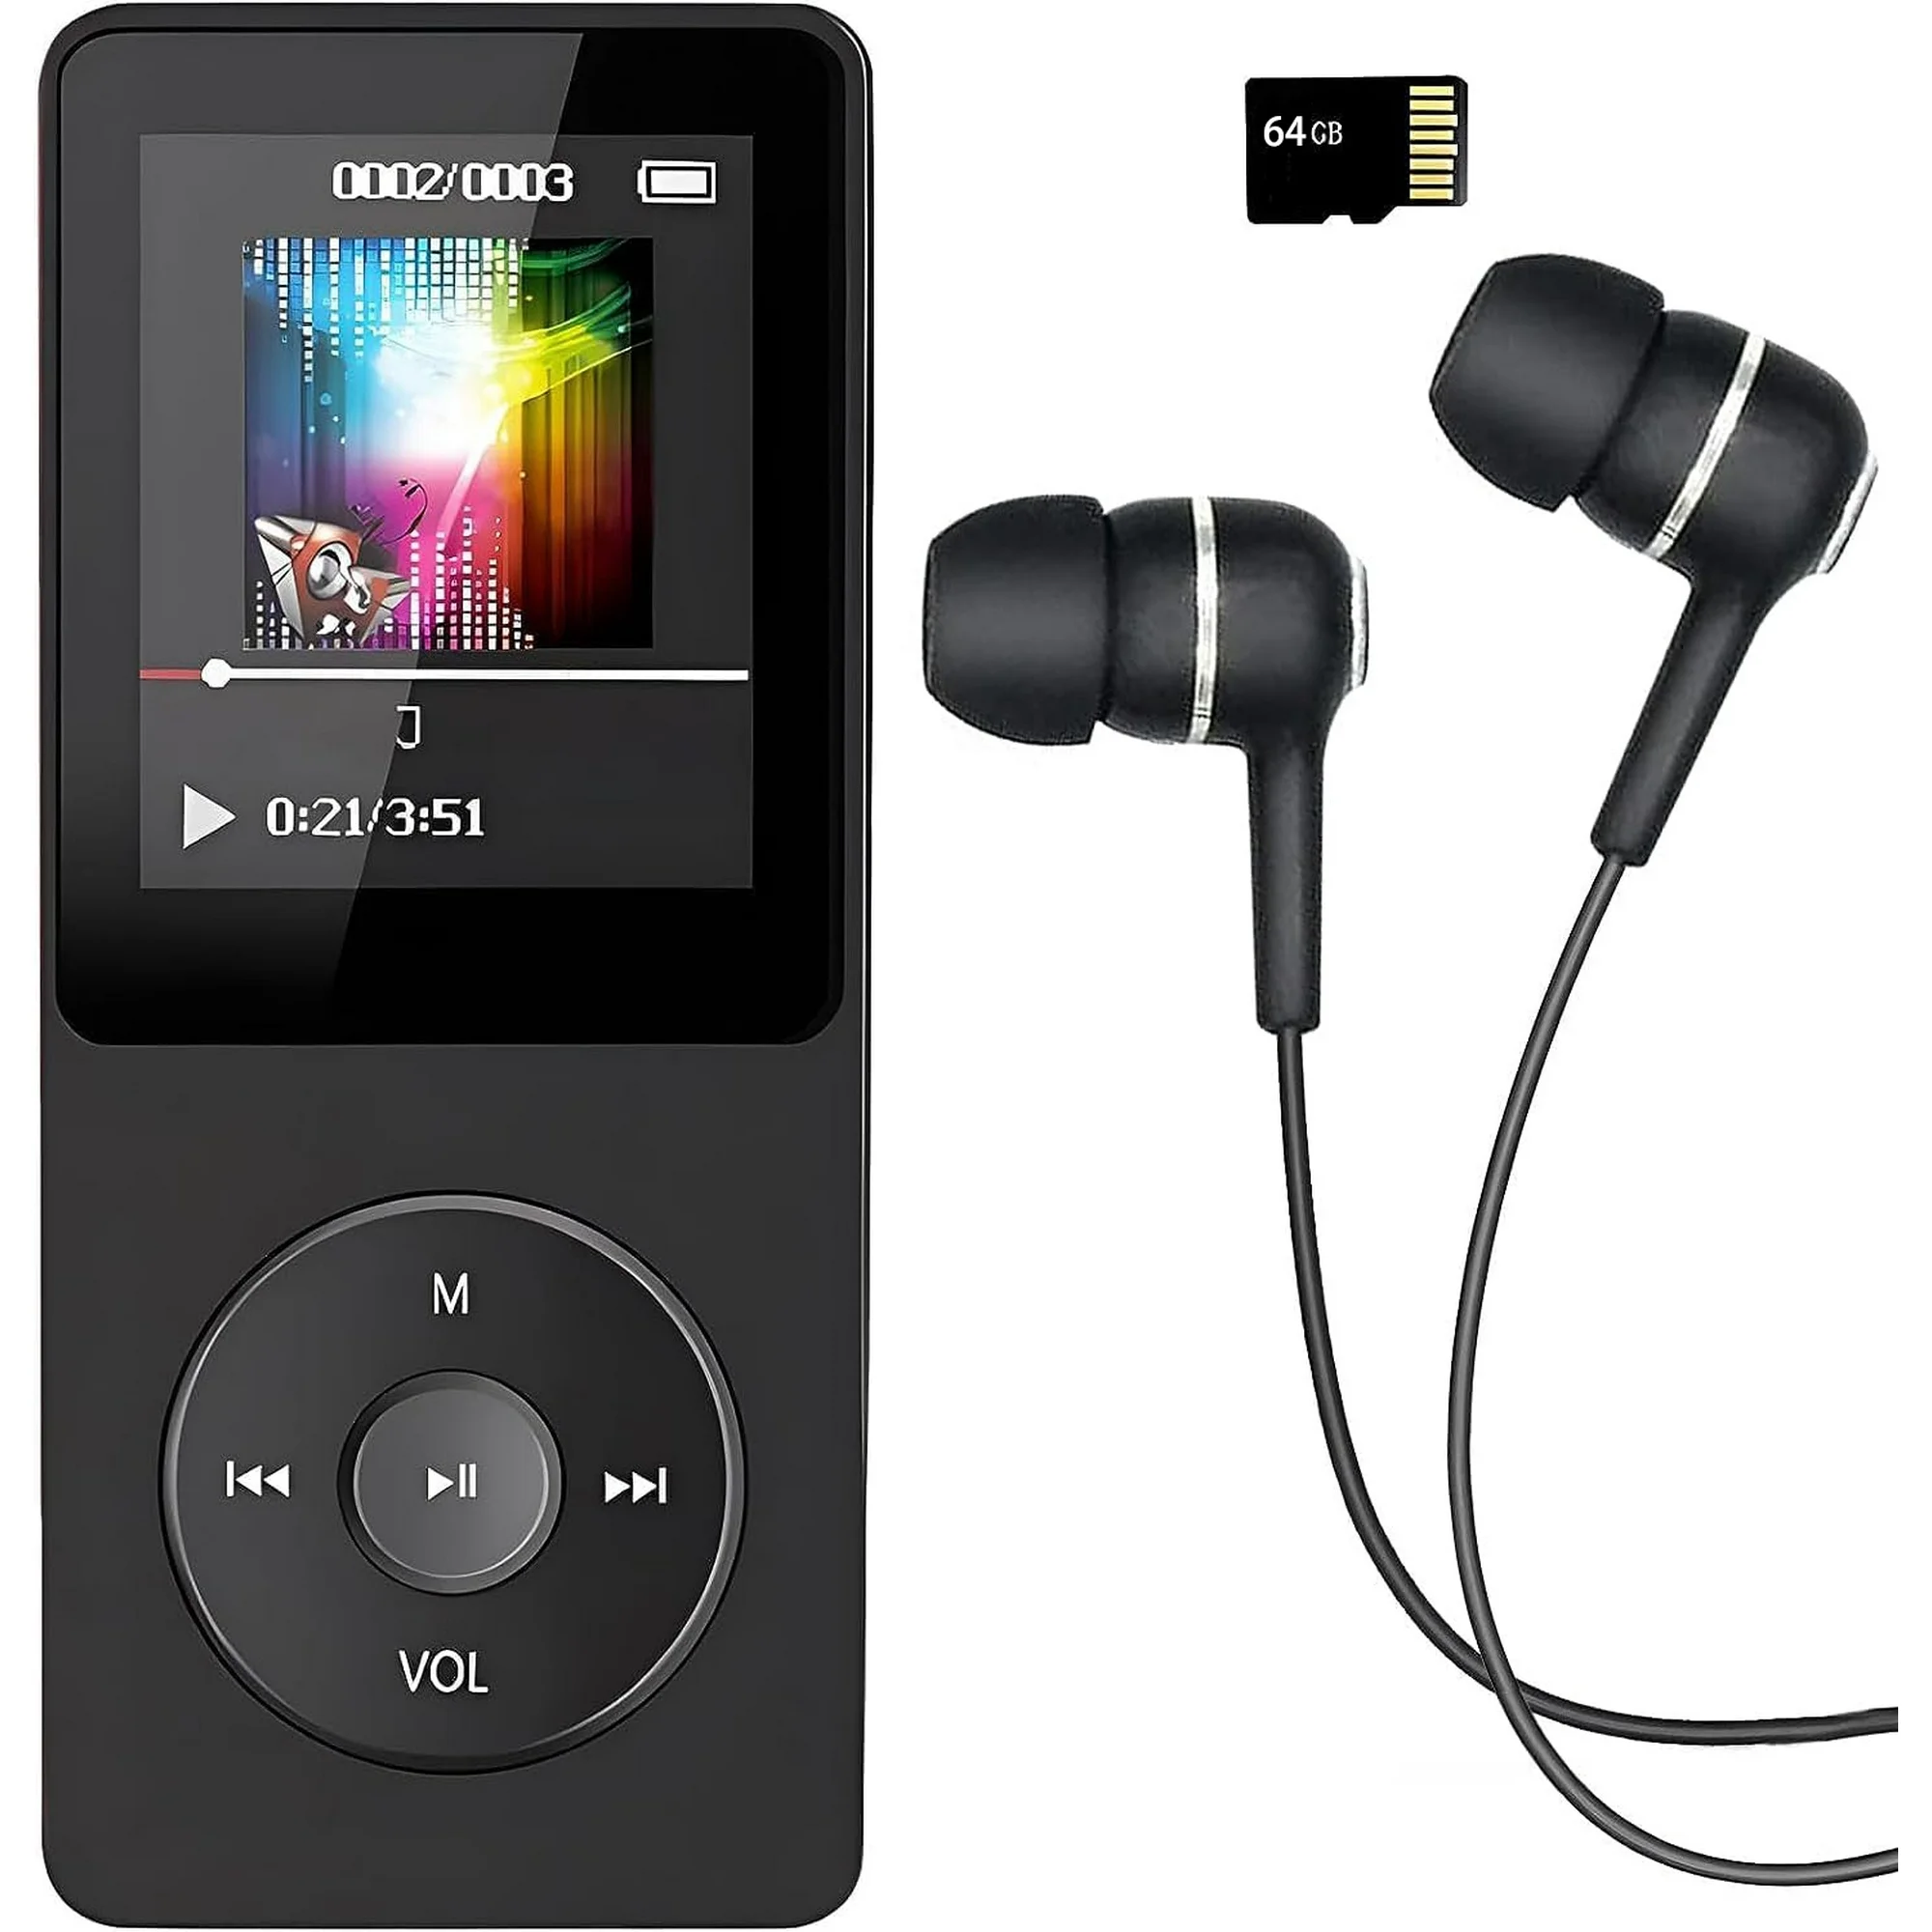 64GB MP3 Player, Music Player with 64GB Micro SD Card, Earphone,Build-in Speaker/Photo/Video Play/FM Radio/Voice Recorder/E-Book Reader, Supports up to 128GB for Kids,Running,Walking